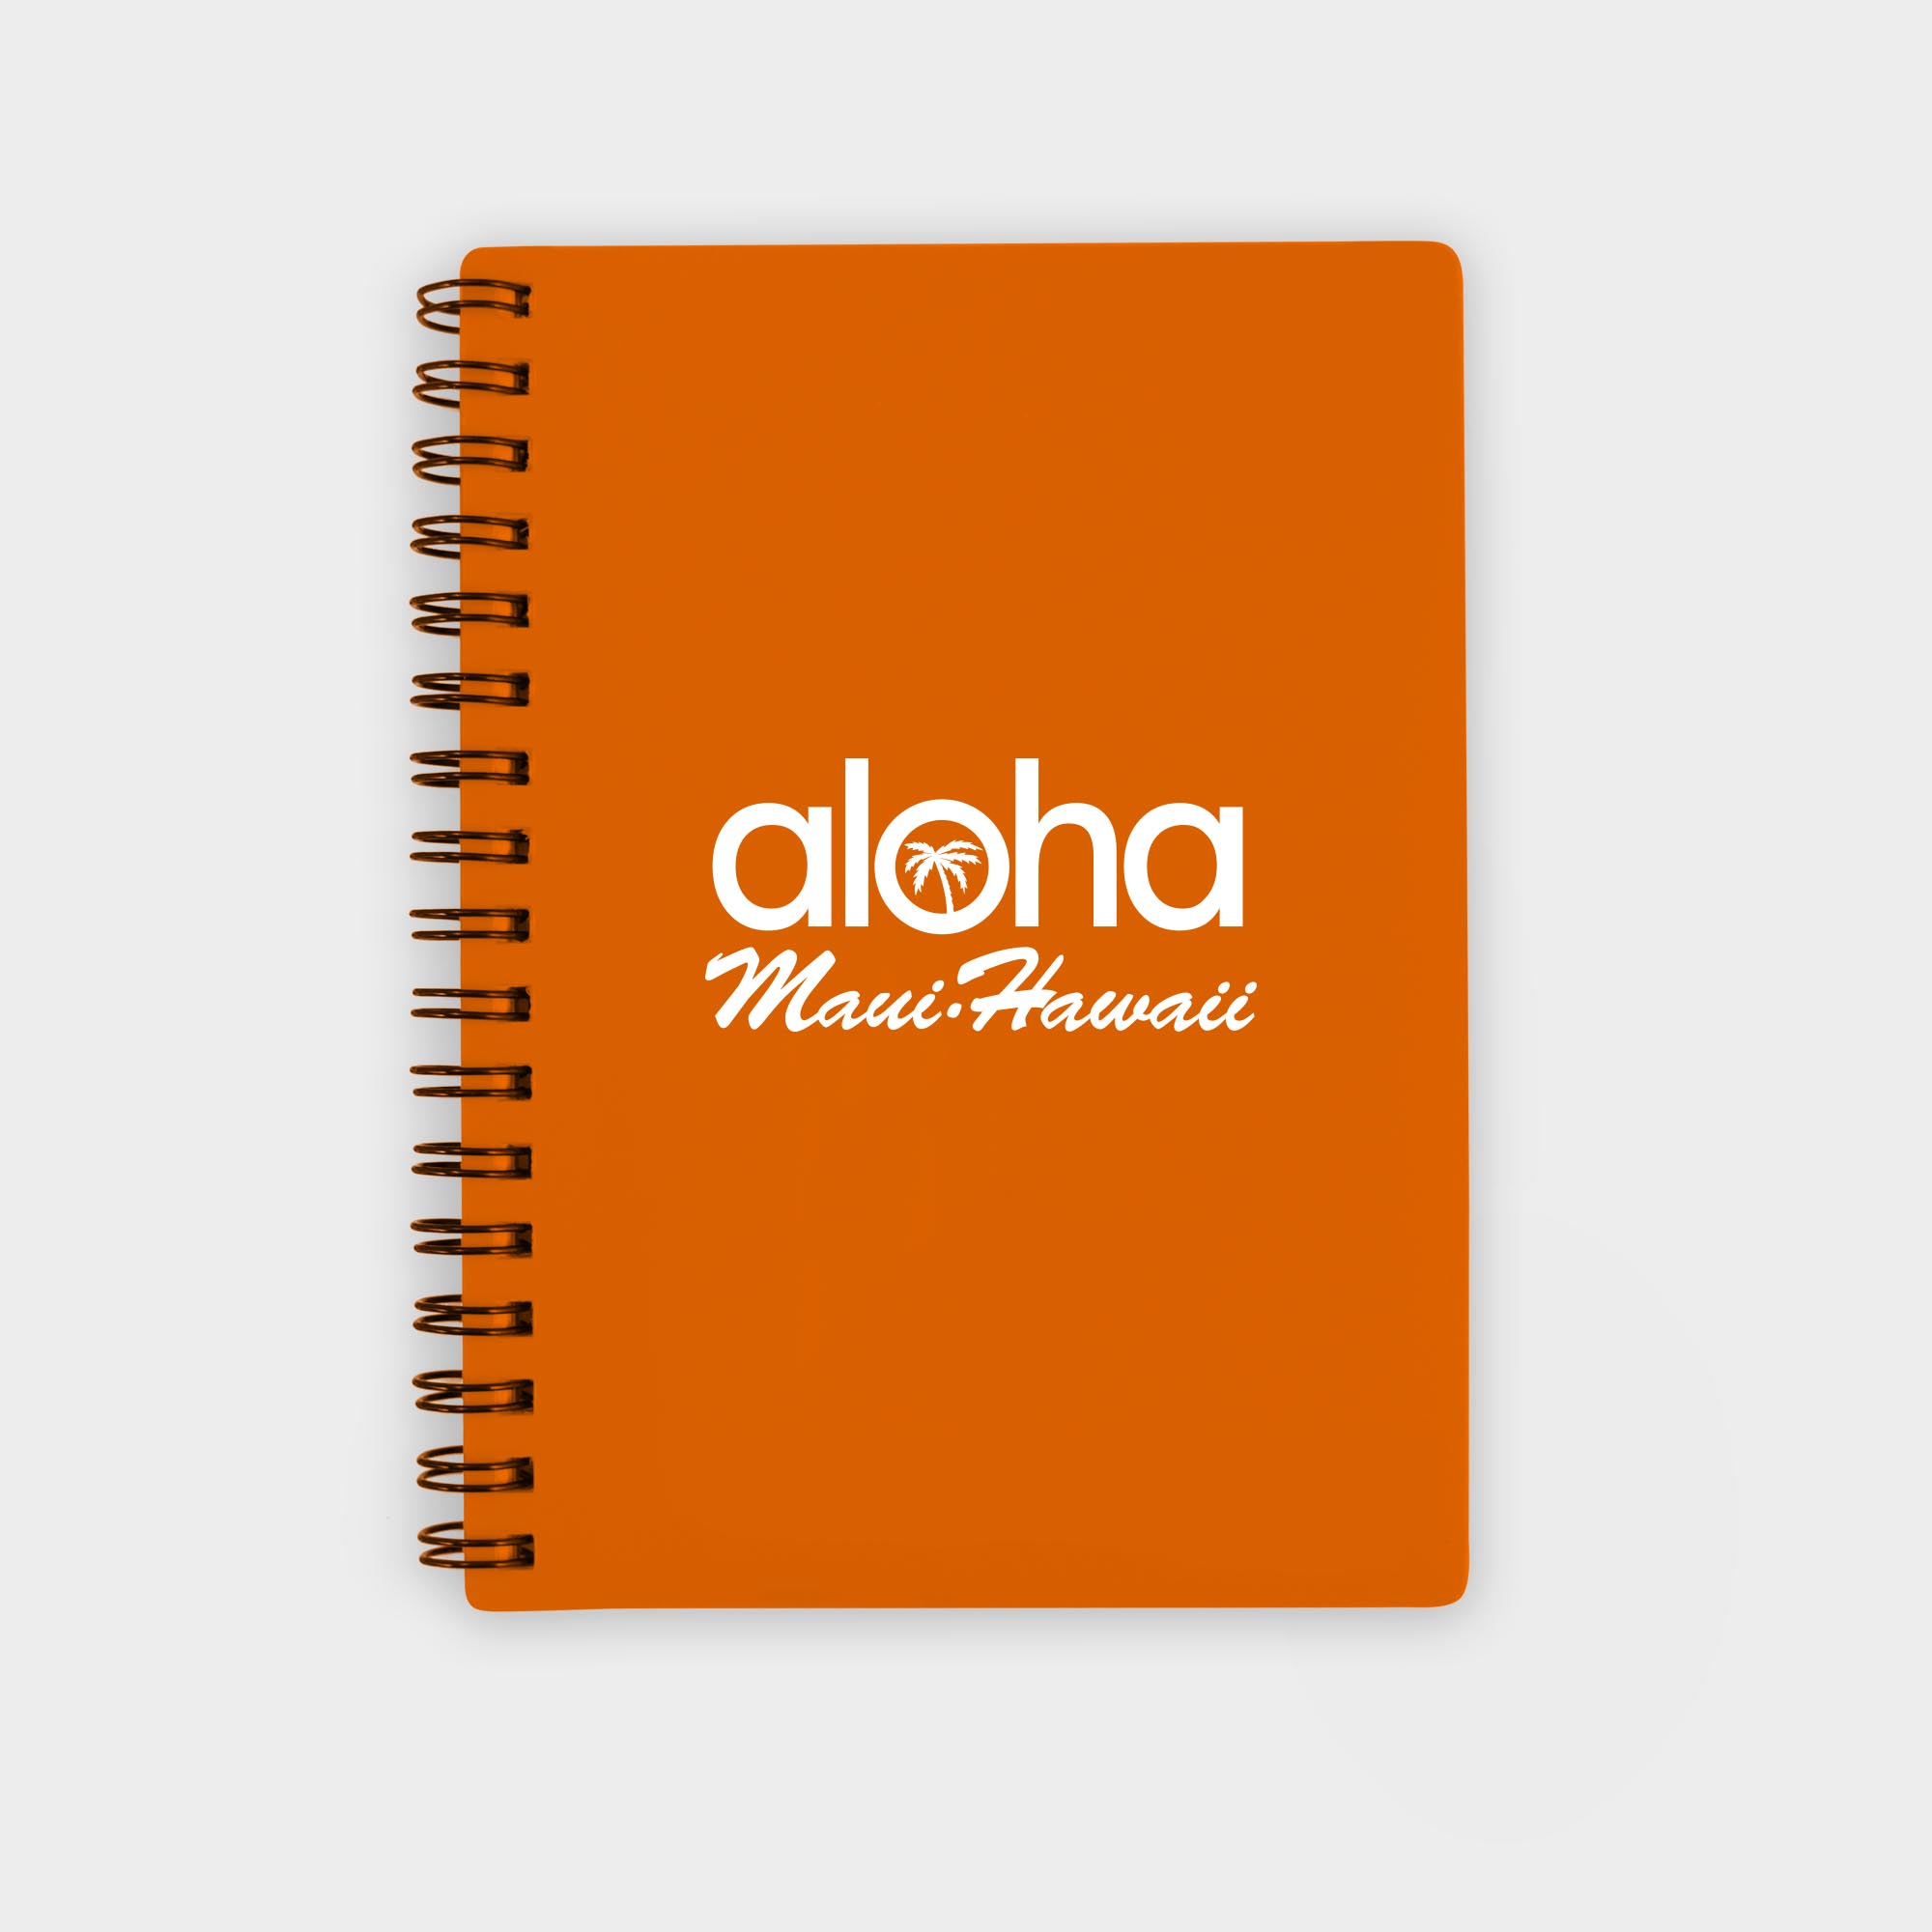 The Green & Good Polypropylene Notebook comes with recycled paper - size A6. The front and back cover is made from recycled polypropylene (500 microns), the sheets are 80gsm. Comes wirebound with 50 sheets as standard. Please contact us if you require a bespoke number of sheets. Orange